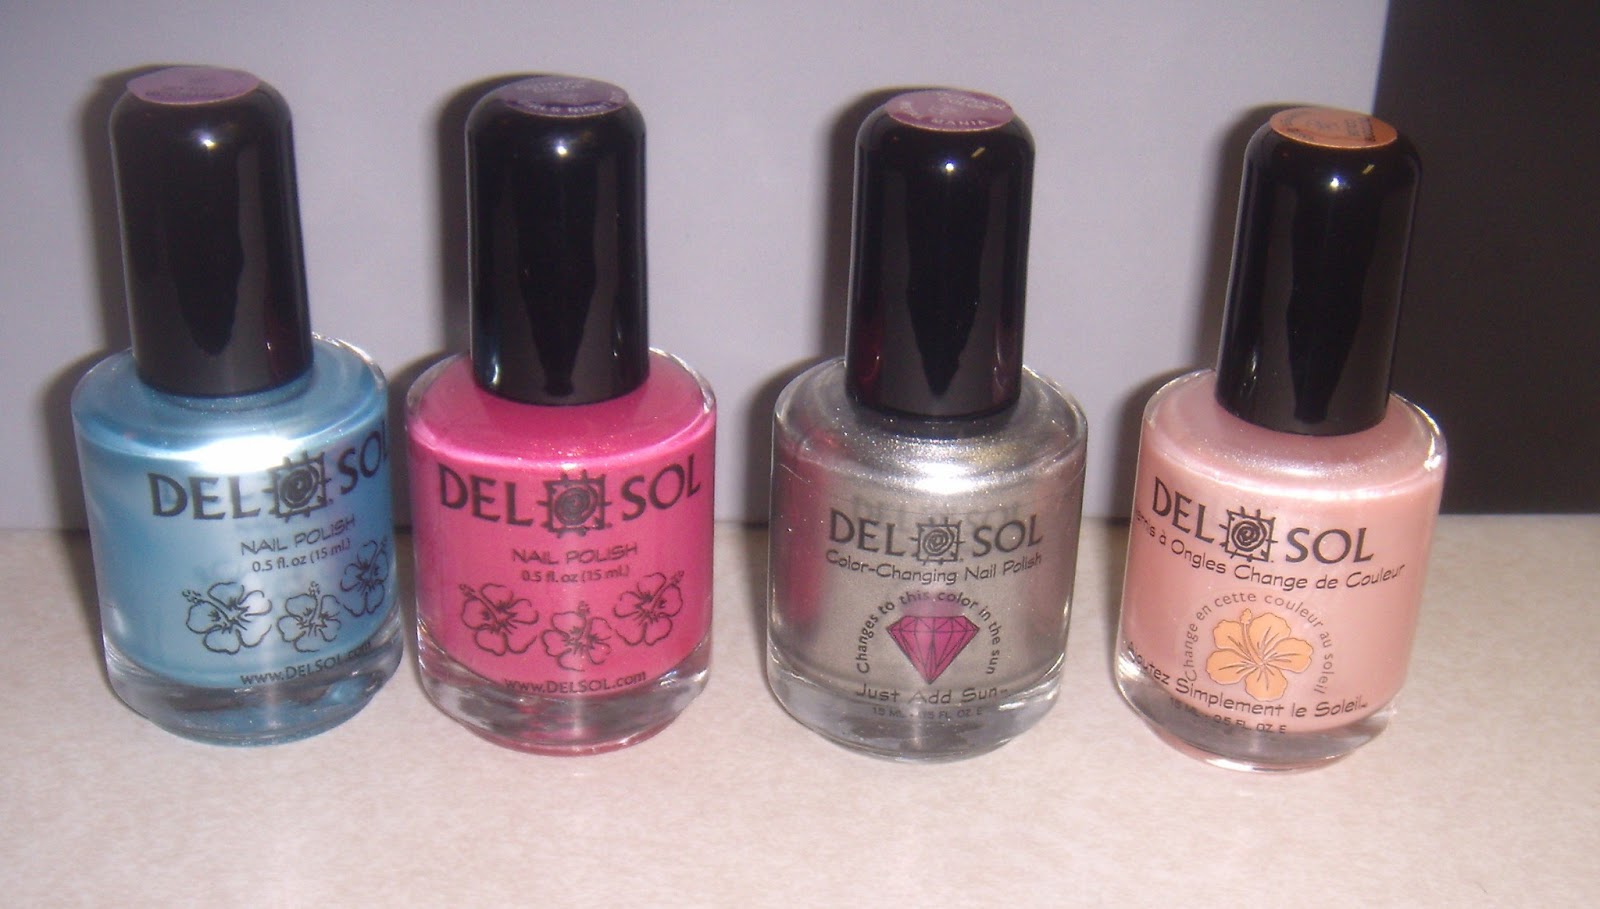 3. Del Sol Color Changing Nail Polish - wide 1